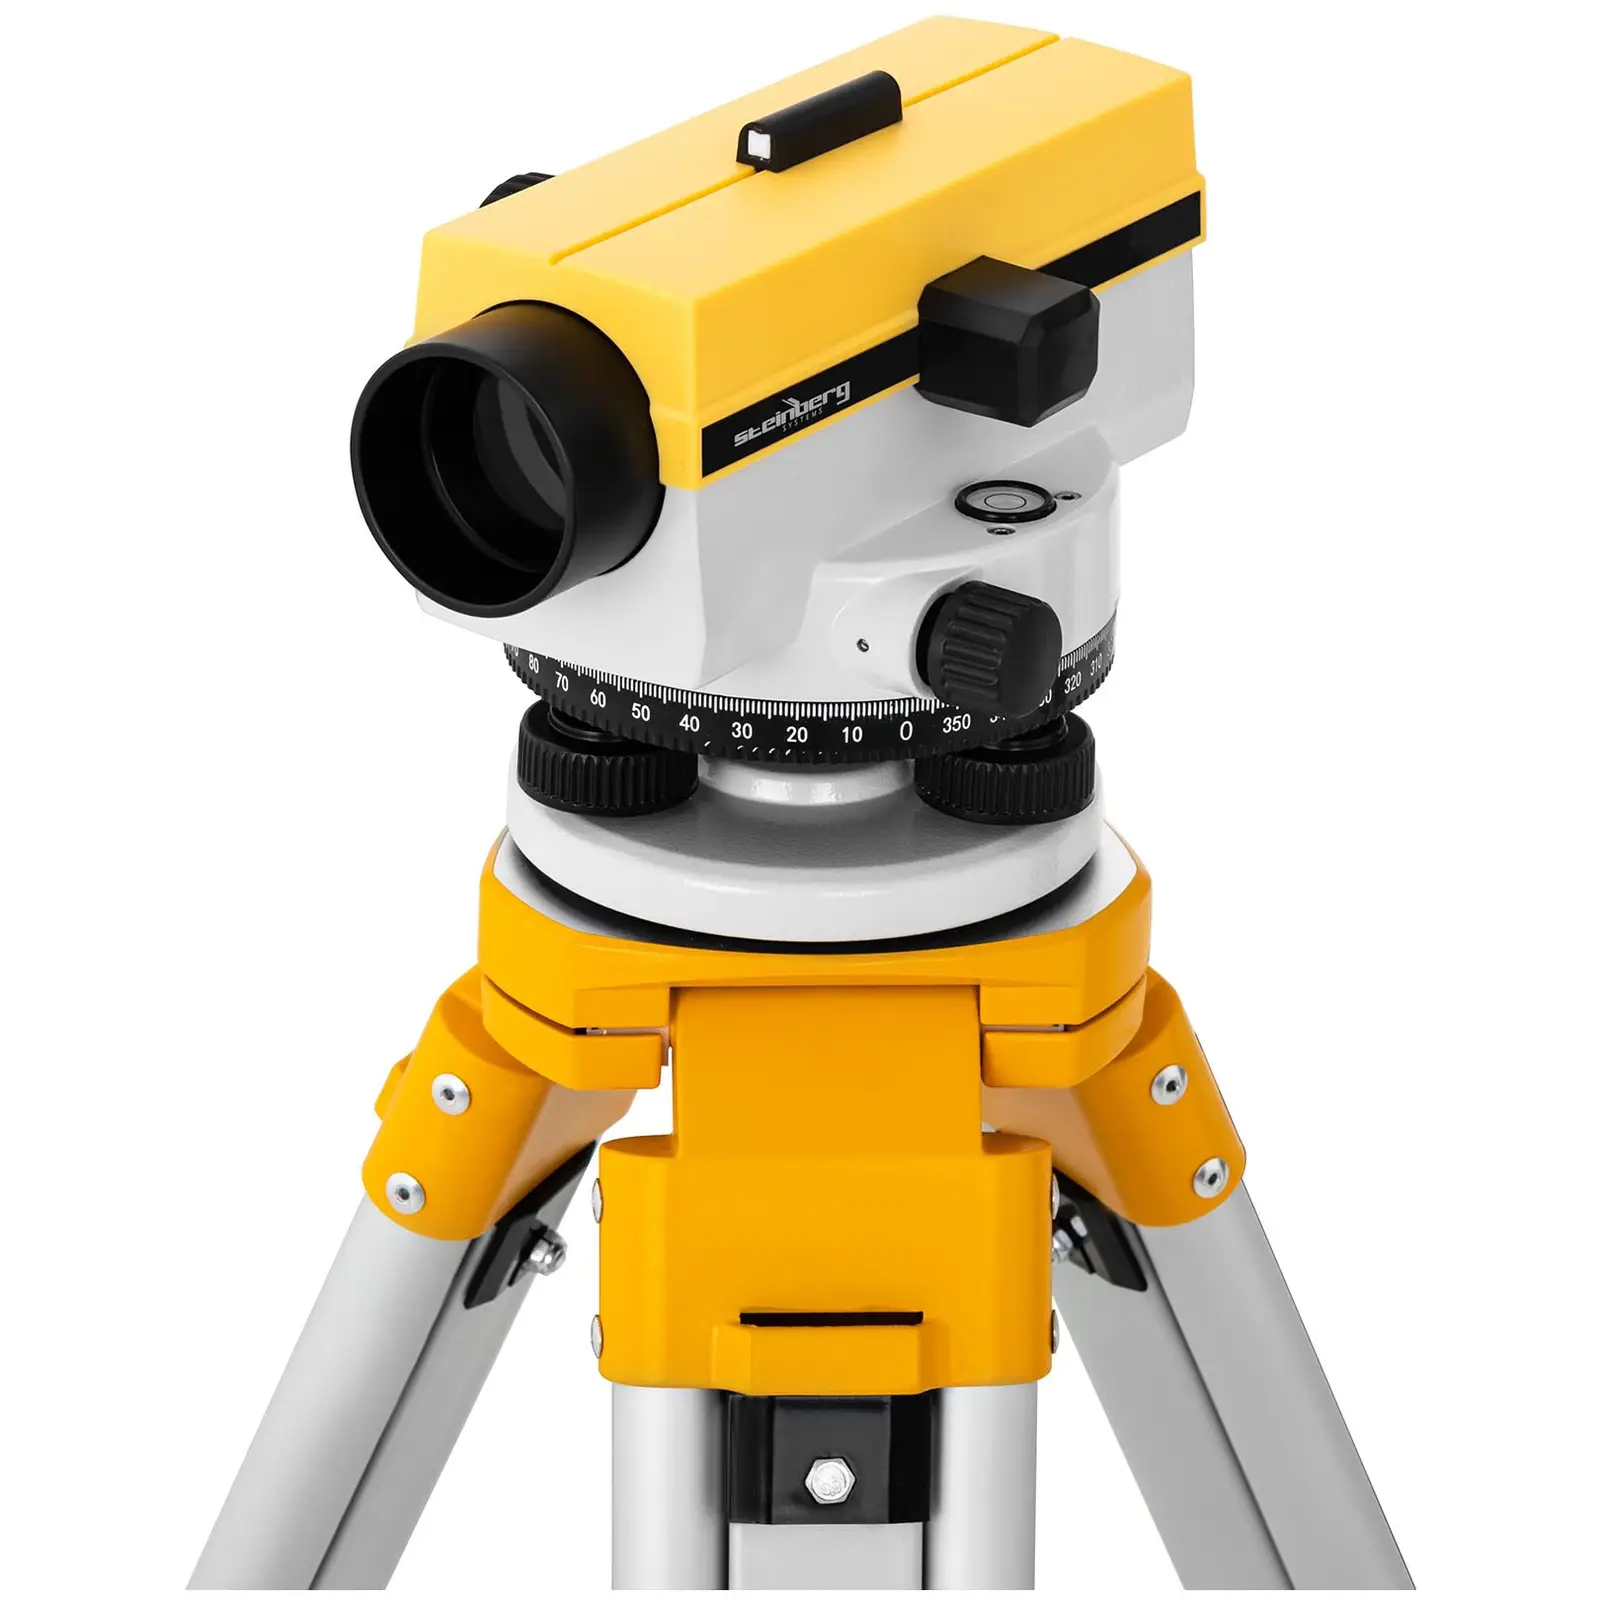 Automatic Level - with tripod and level staff - 20x magnification - 34 mm lens - deviation 2.5 mm - air damped compensator